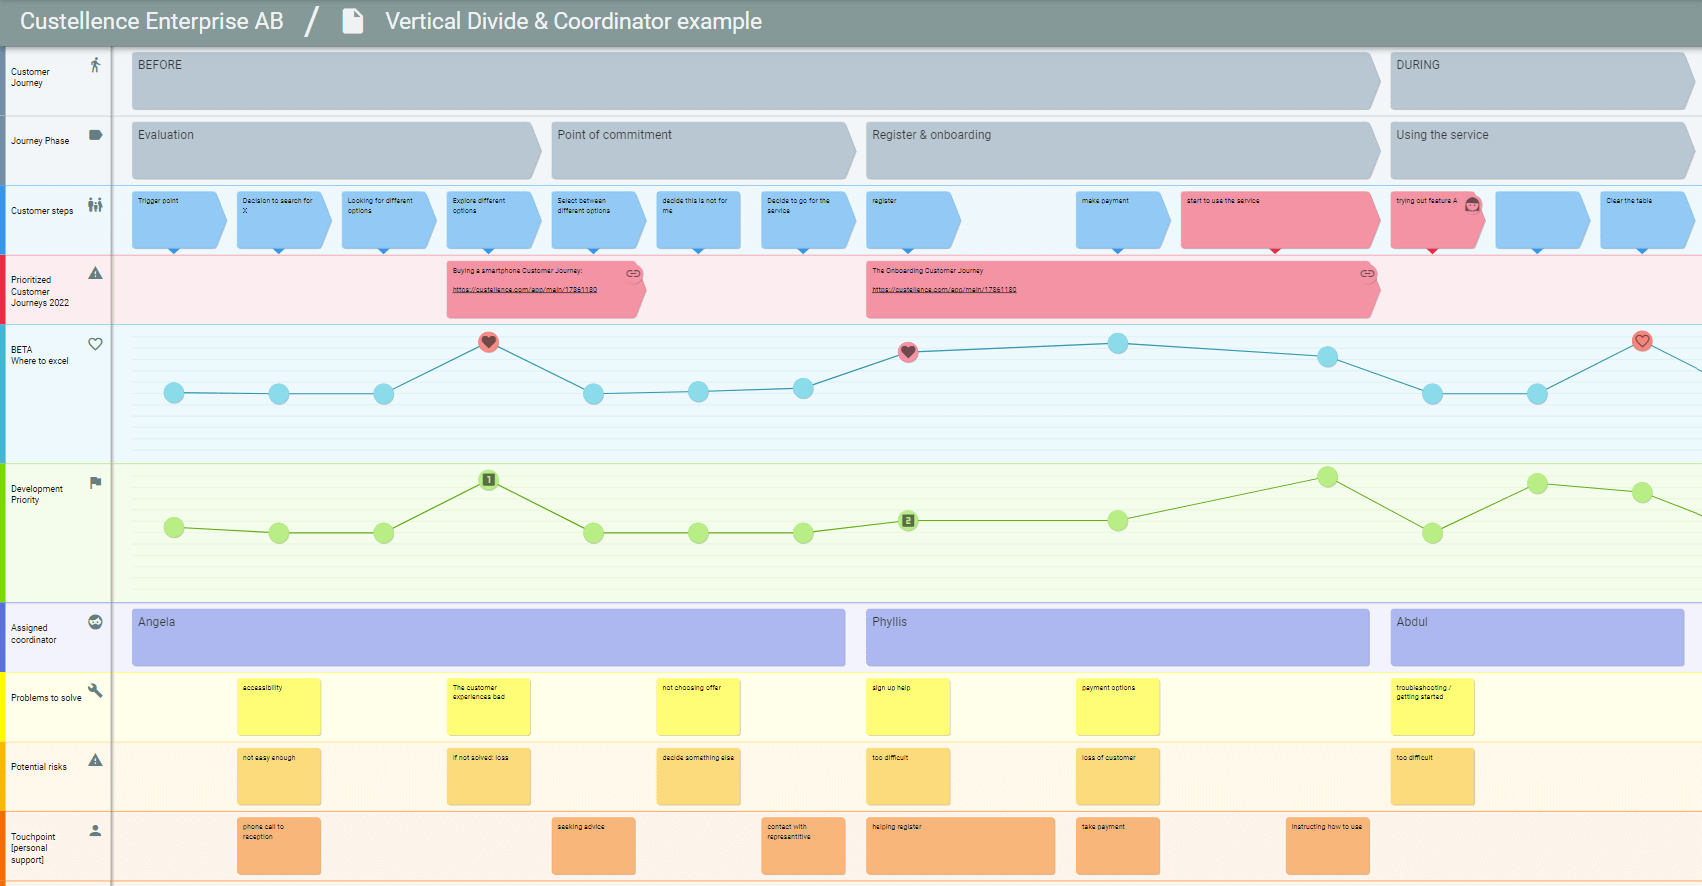 A completed customer journey map, filled with customer insights, needs, pain points, and identifiable gaps for improved customer experience